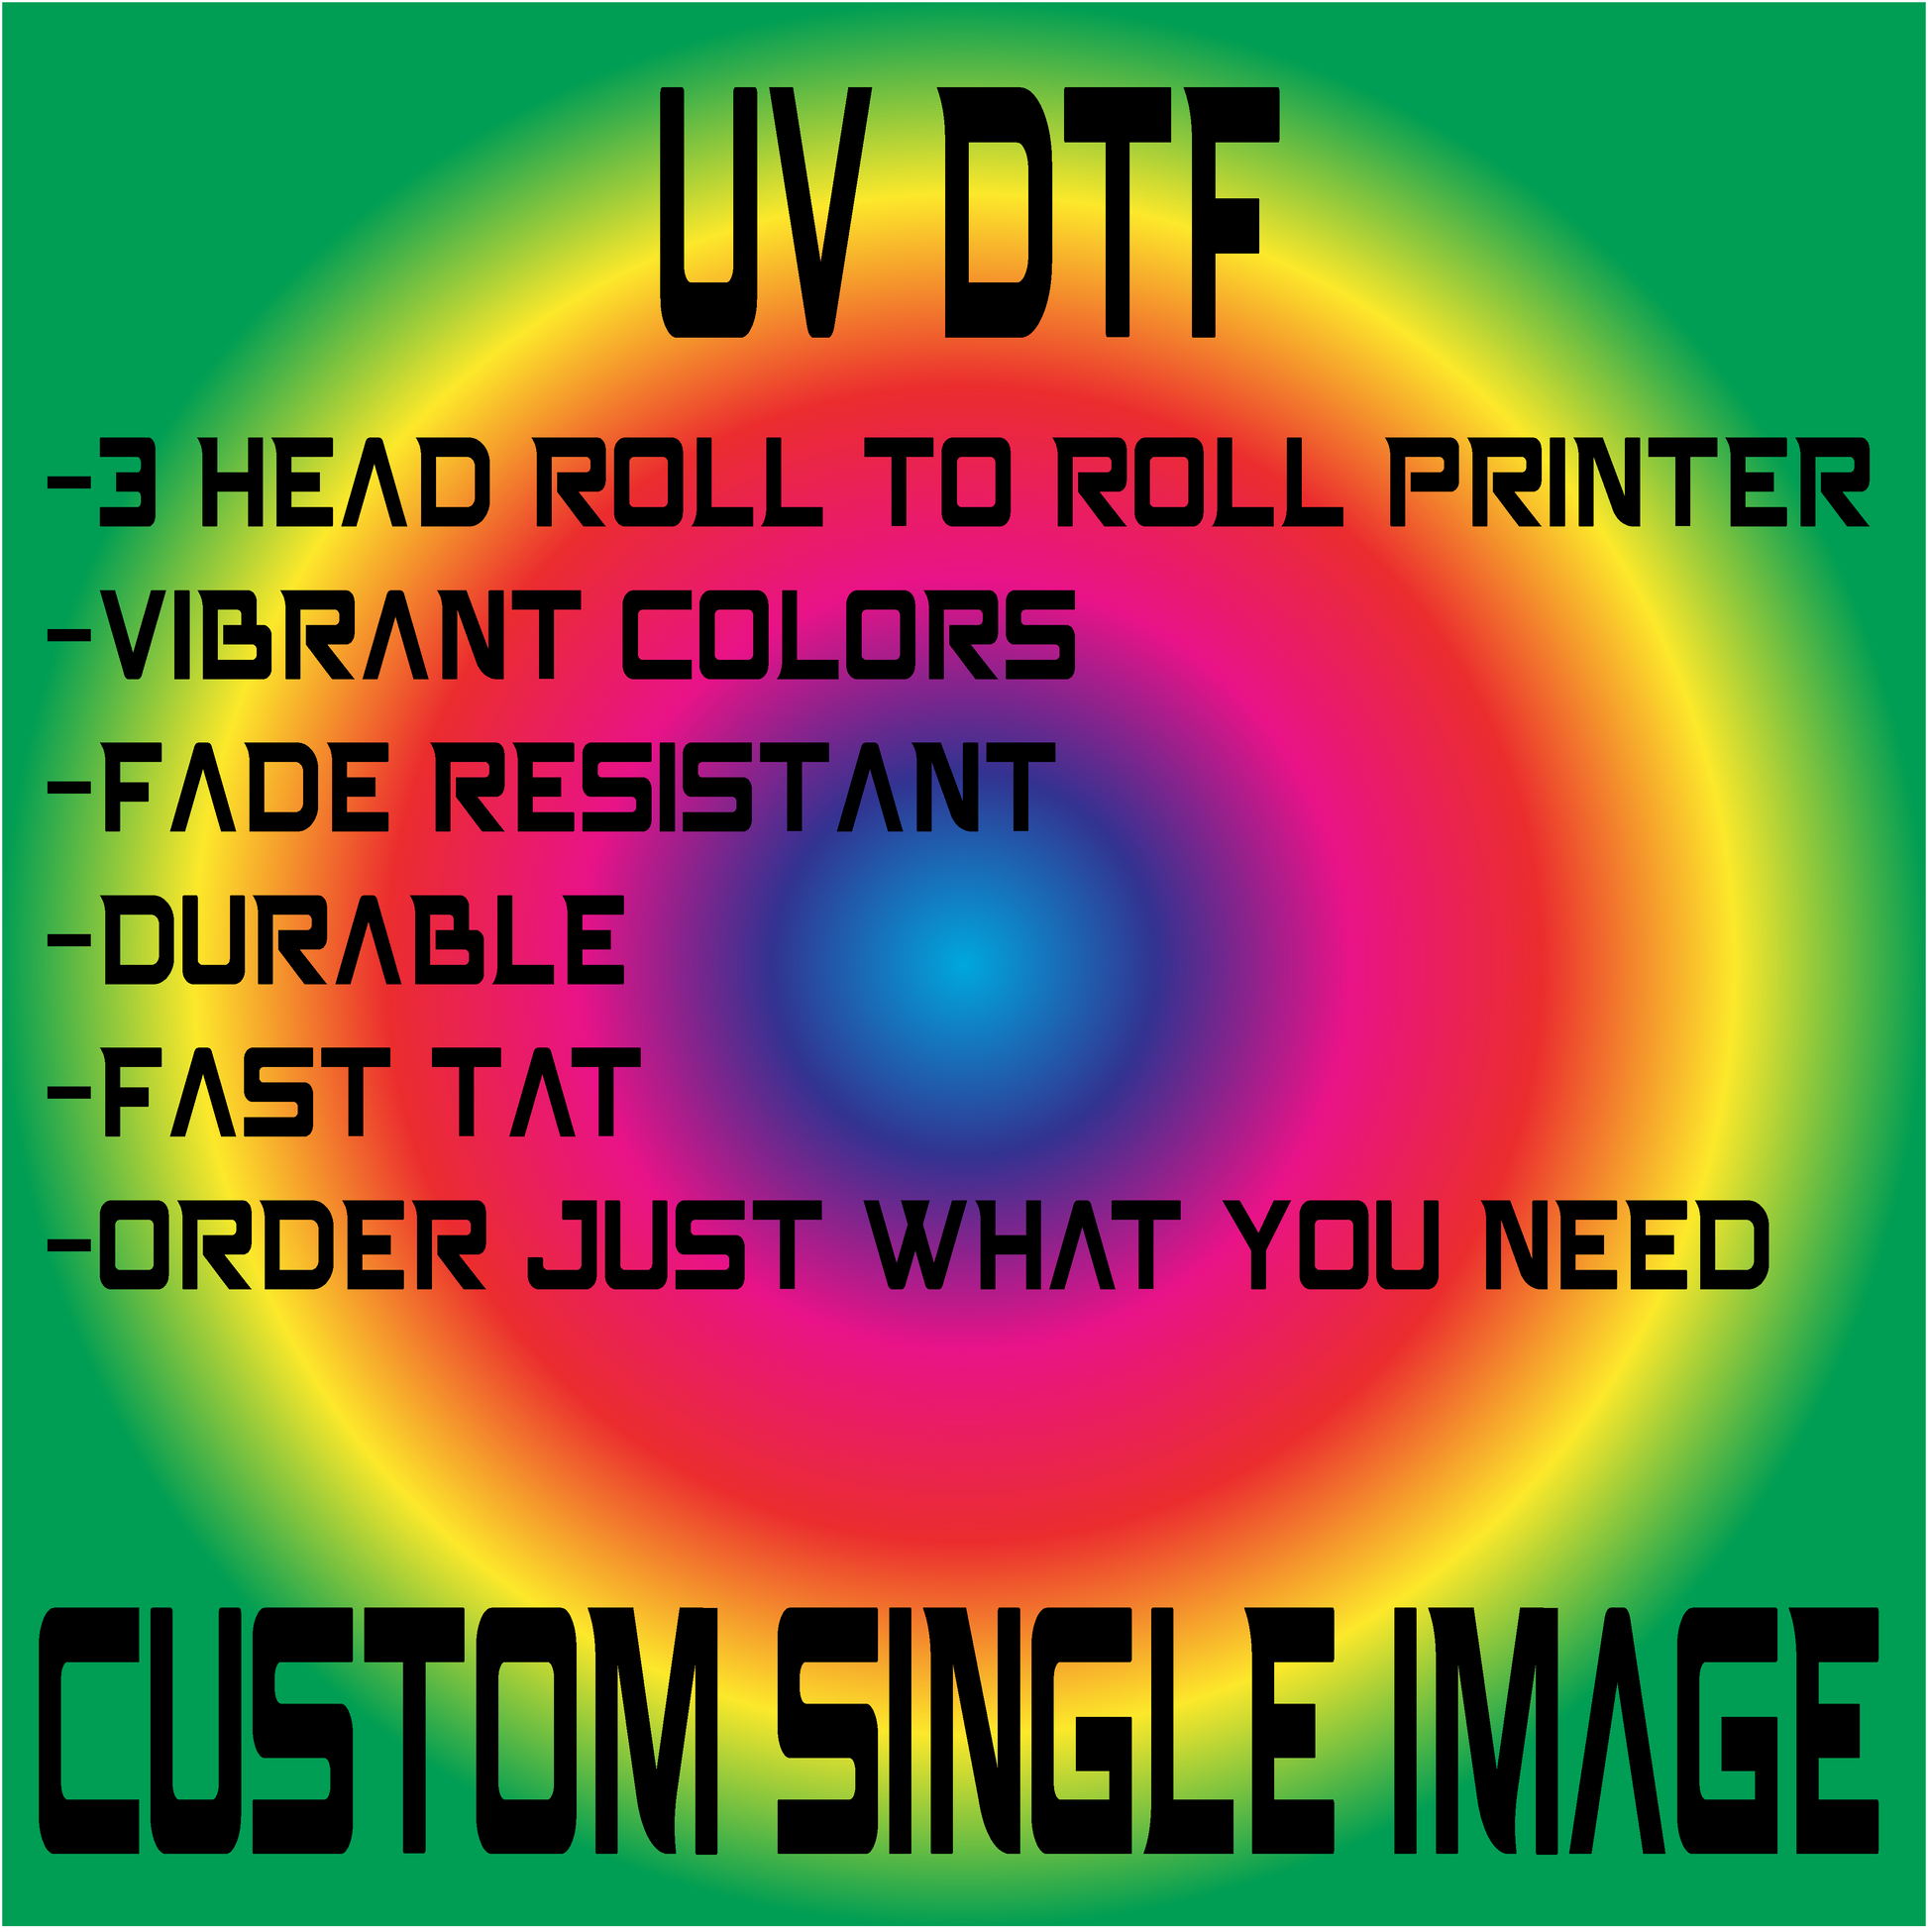 JUST IRON, AND DONE. Custom Printed DTF Transfers: iron press transfer to  any fabric type